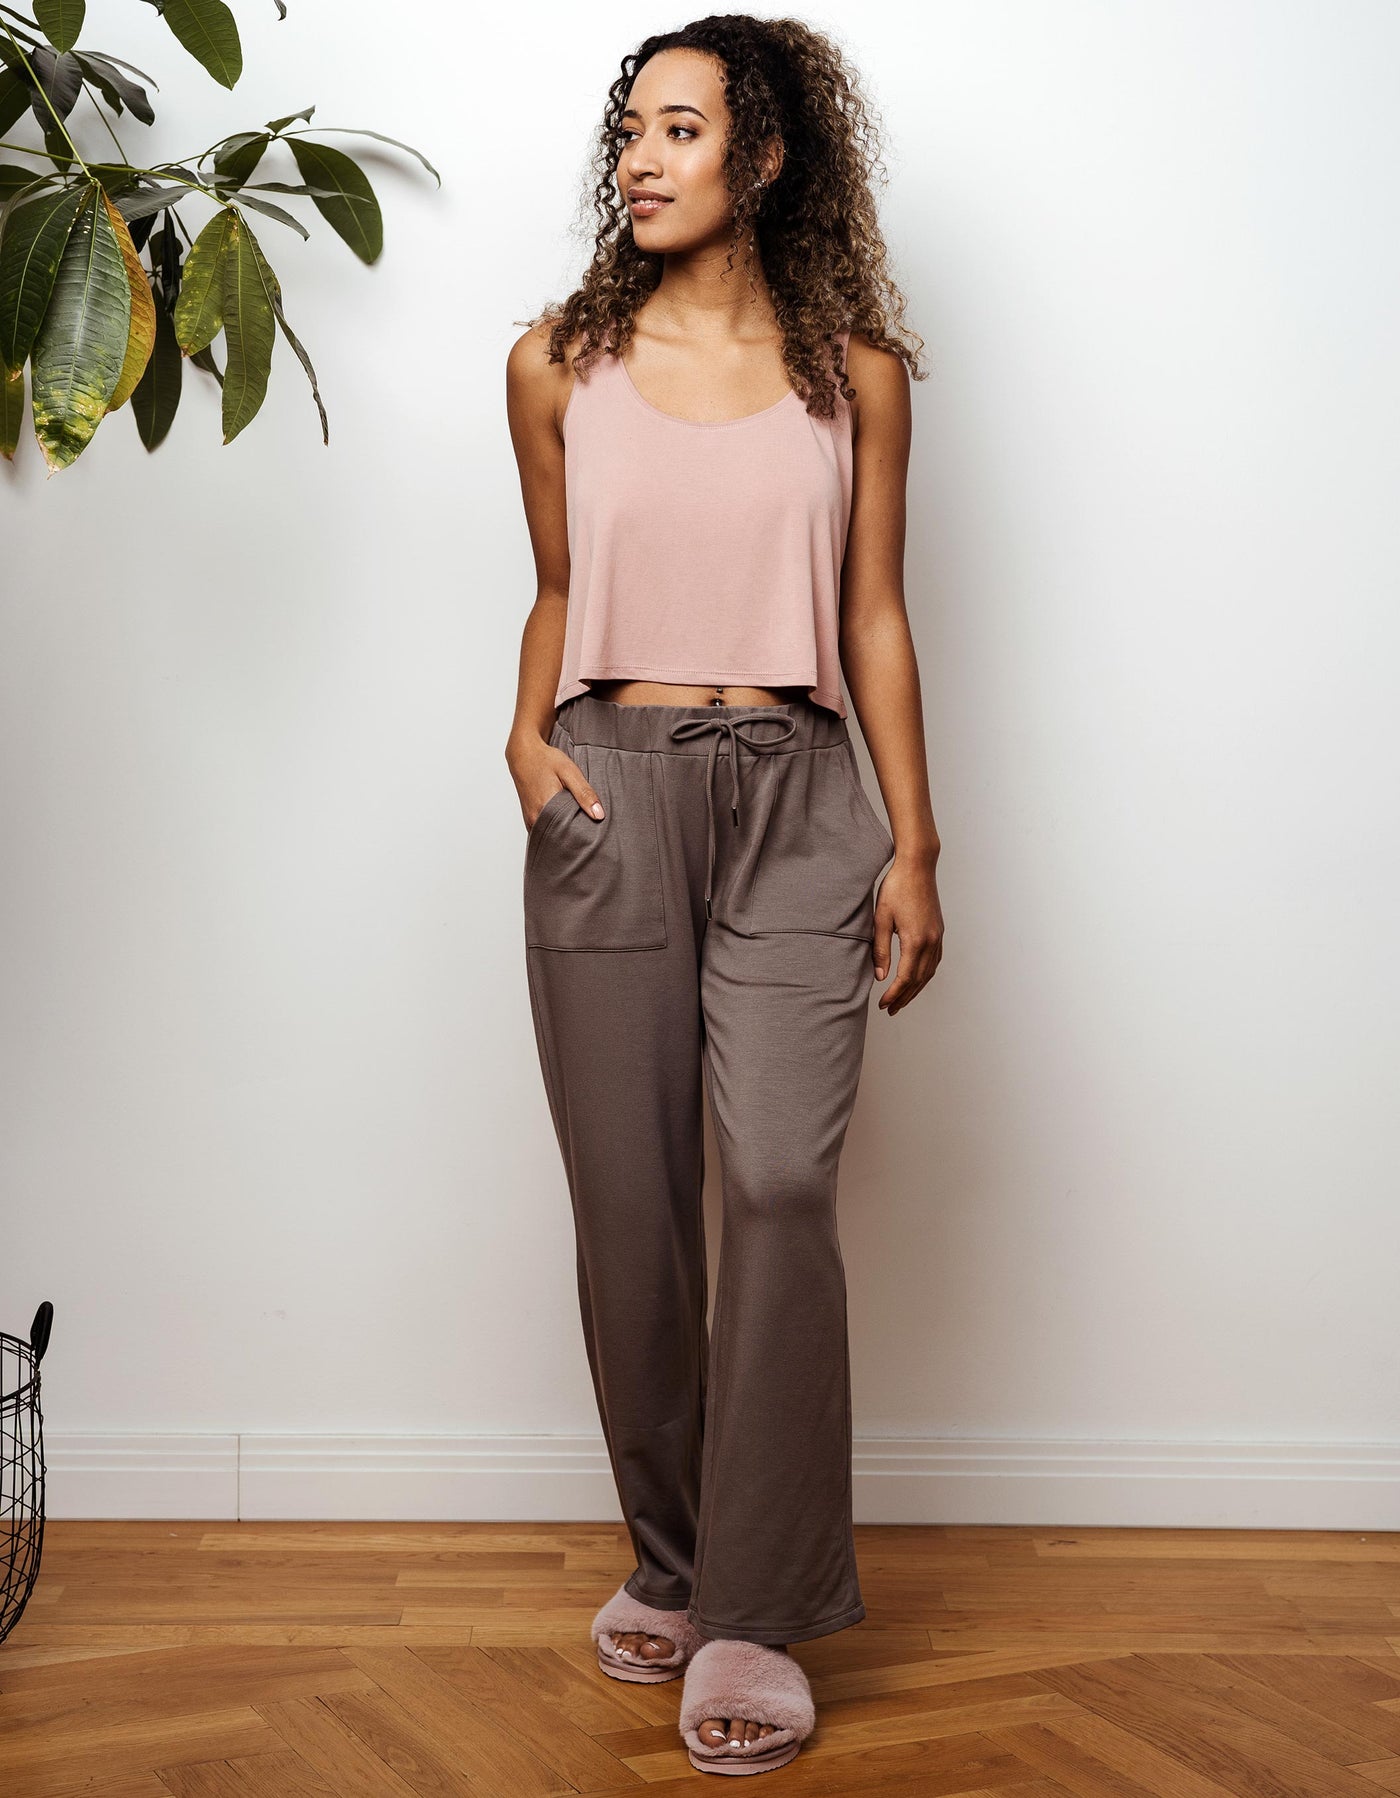 thebowattitude_casual_wear_luxury_home_wear_home-office_looks_outfit_set_oceans_pamela_fabletics_reif_apart_made-in-europe